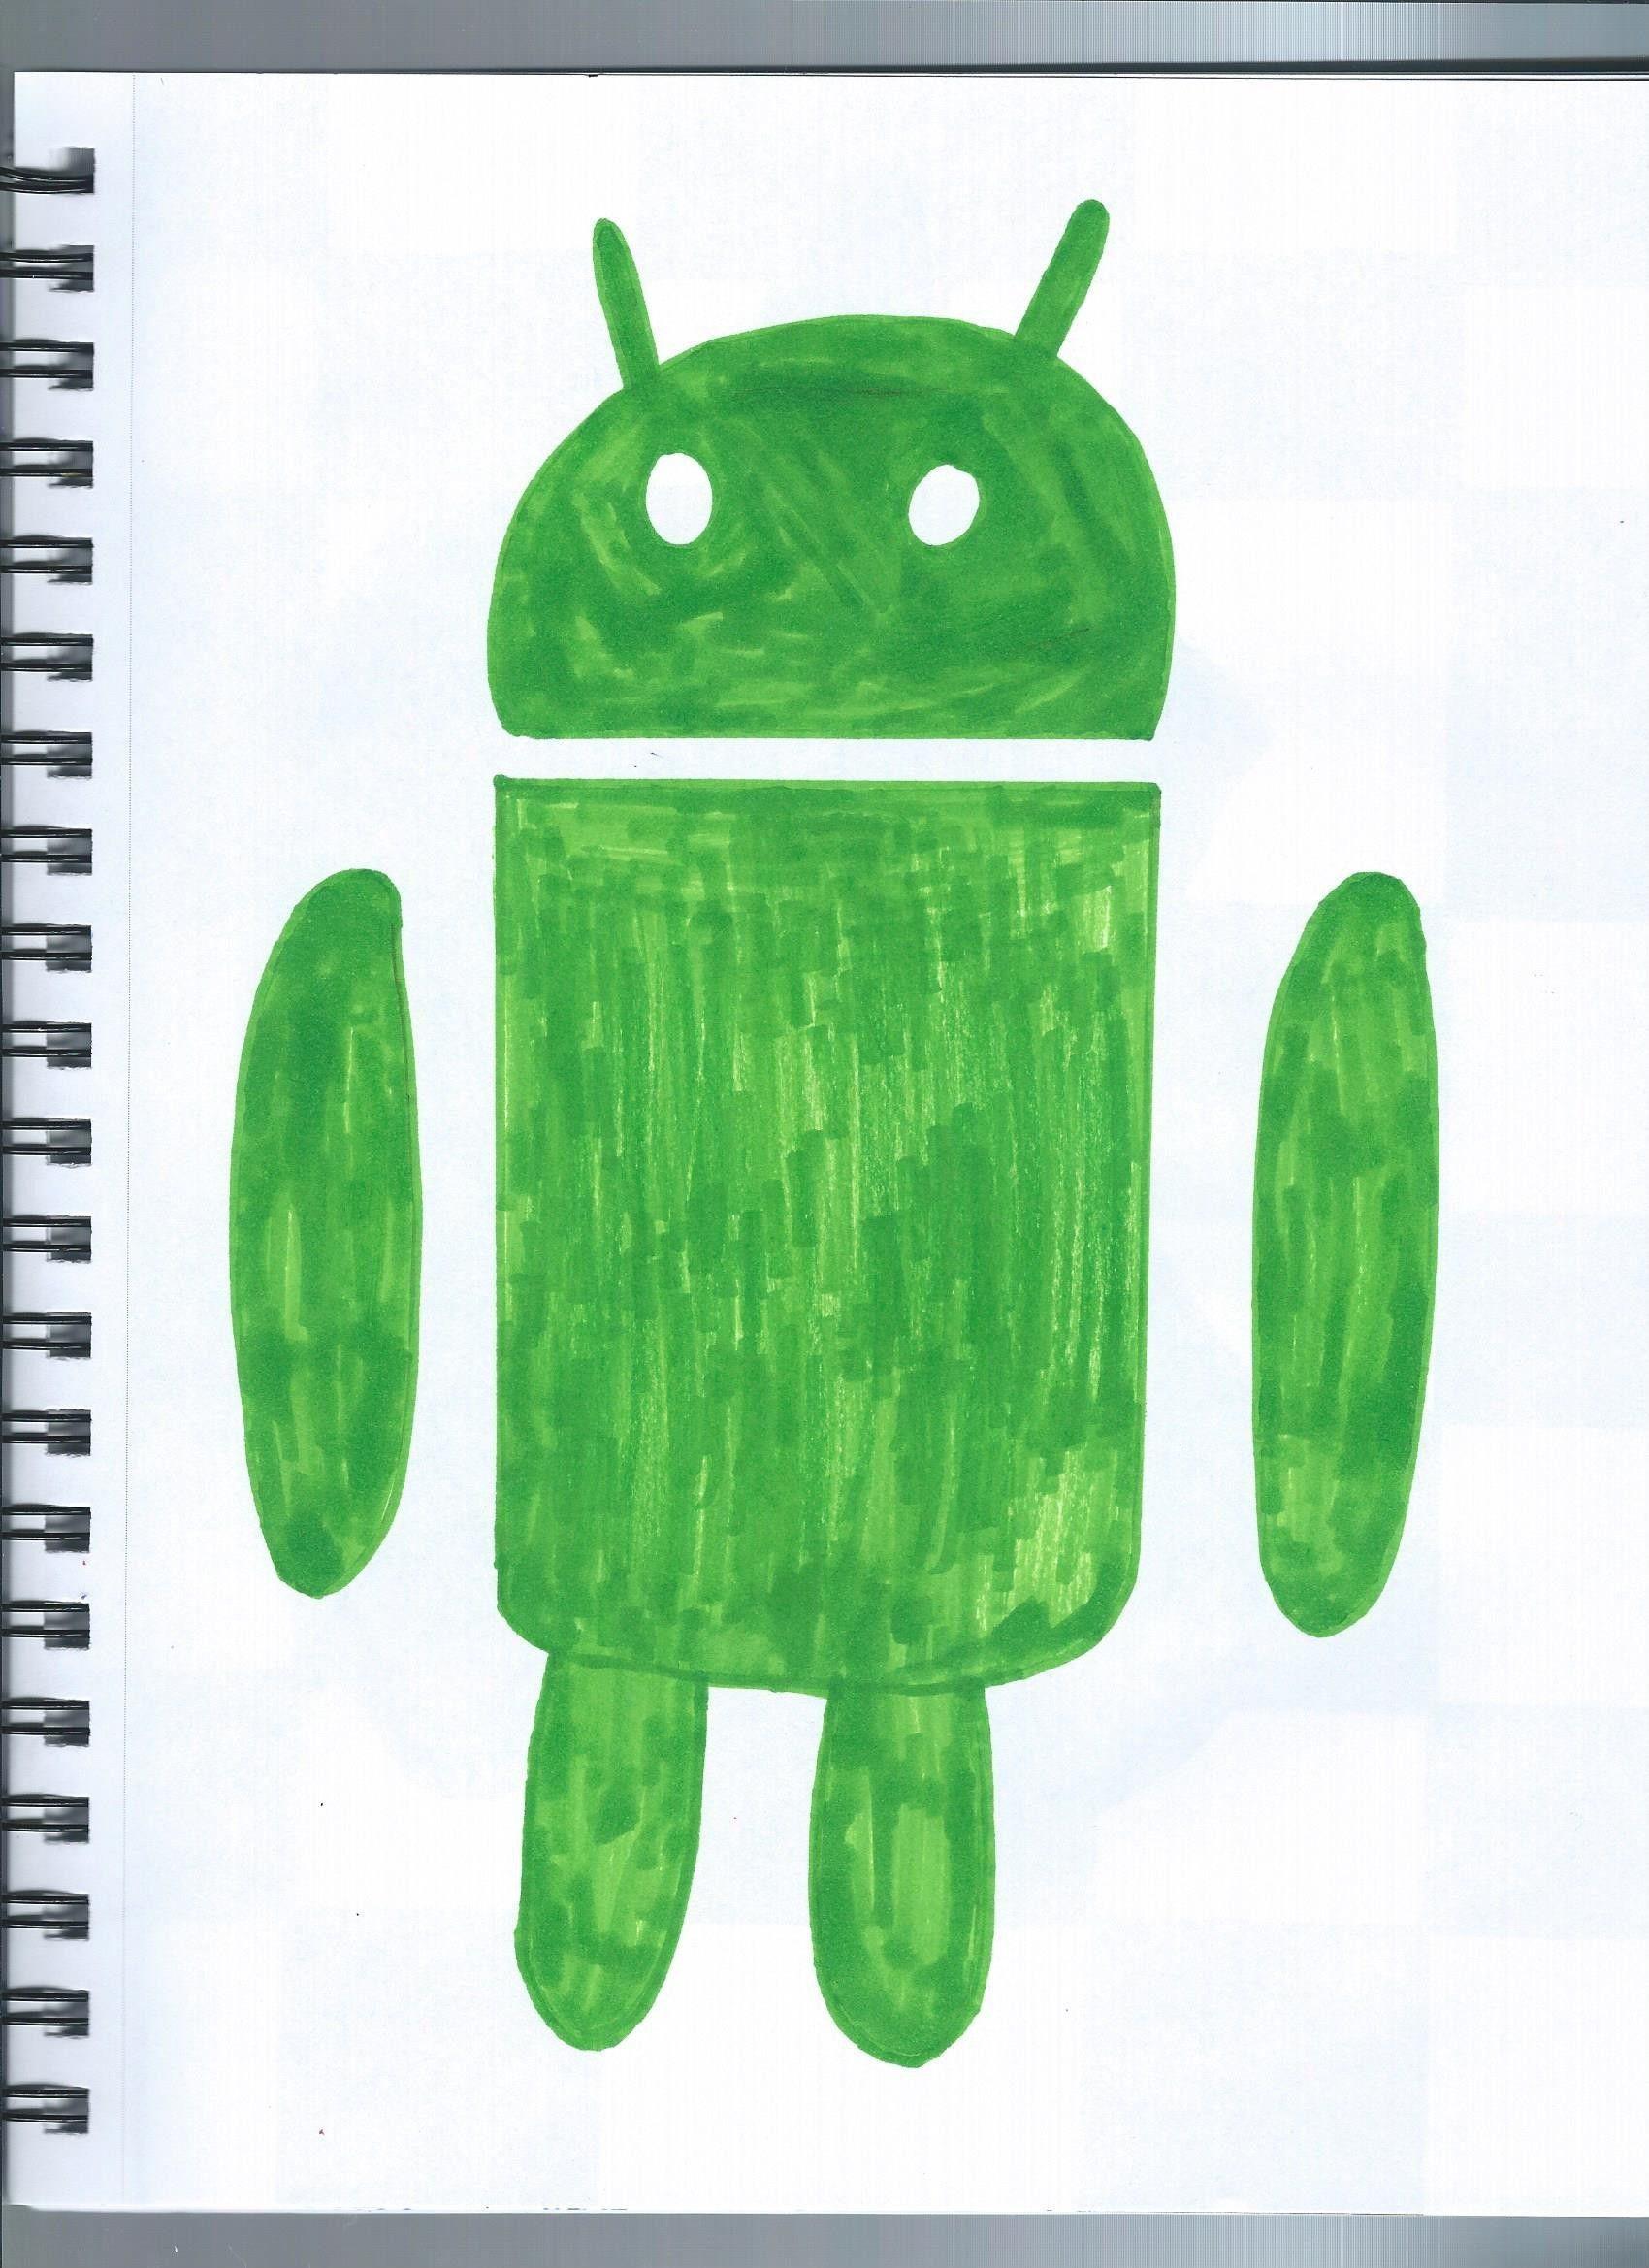 G Robot Logo - Victoria G - My Android Robot Logo Drawing